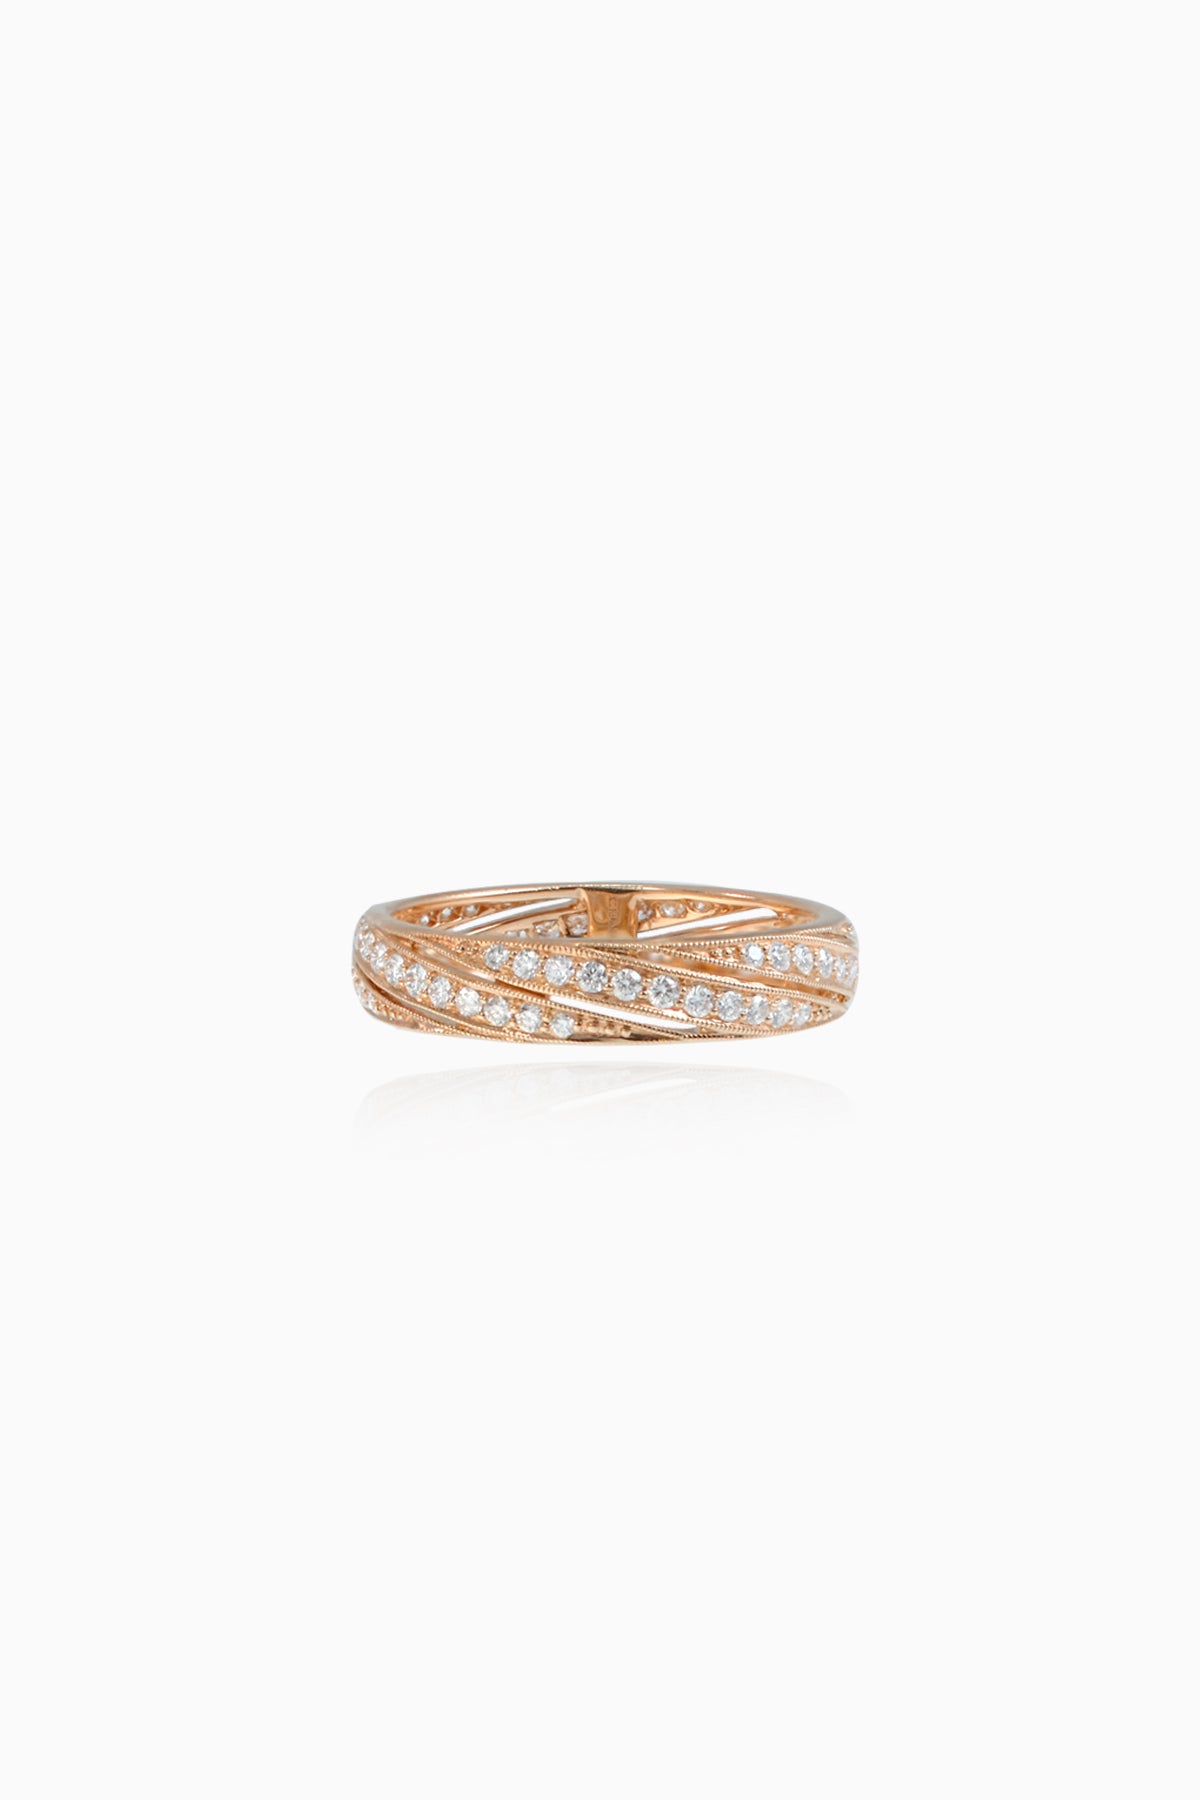 Ray of Light Band in Rose Gold